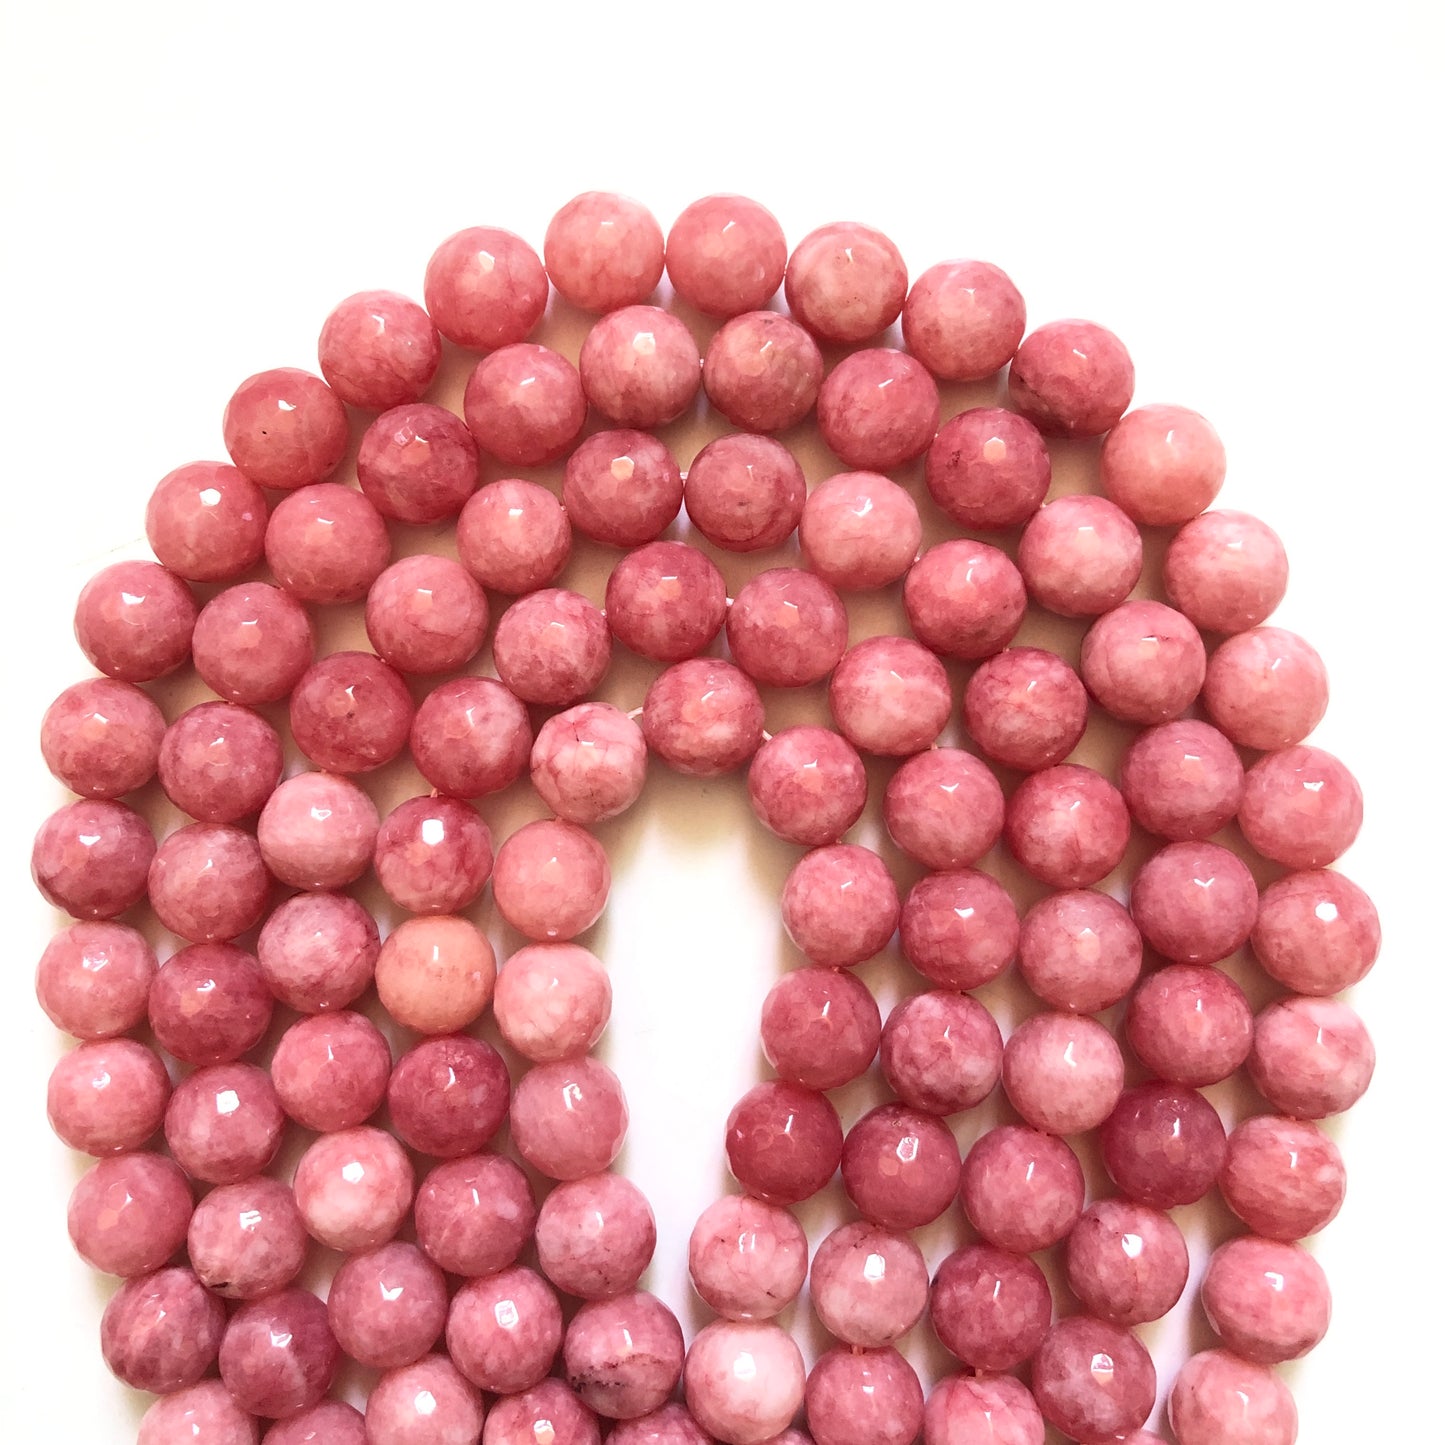 2 Strands/lot 12mm Salmon Pink Faceted Jade Stone Beads Stone Beads 12mm Stone Beads Faceted Jade Beads New Beads Arrivals Charms Beads Beyond